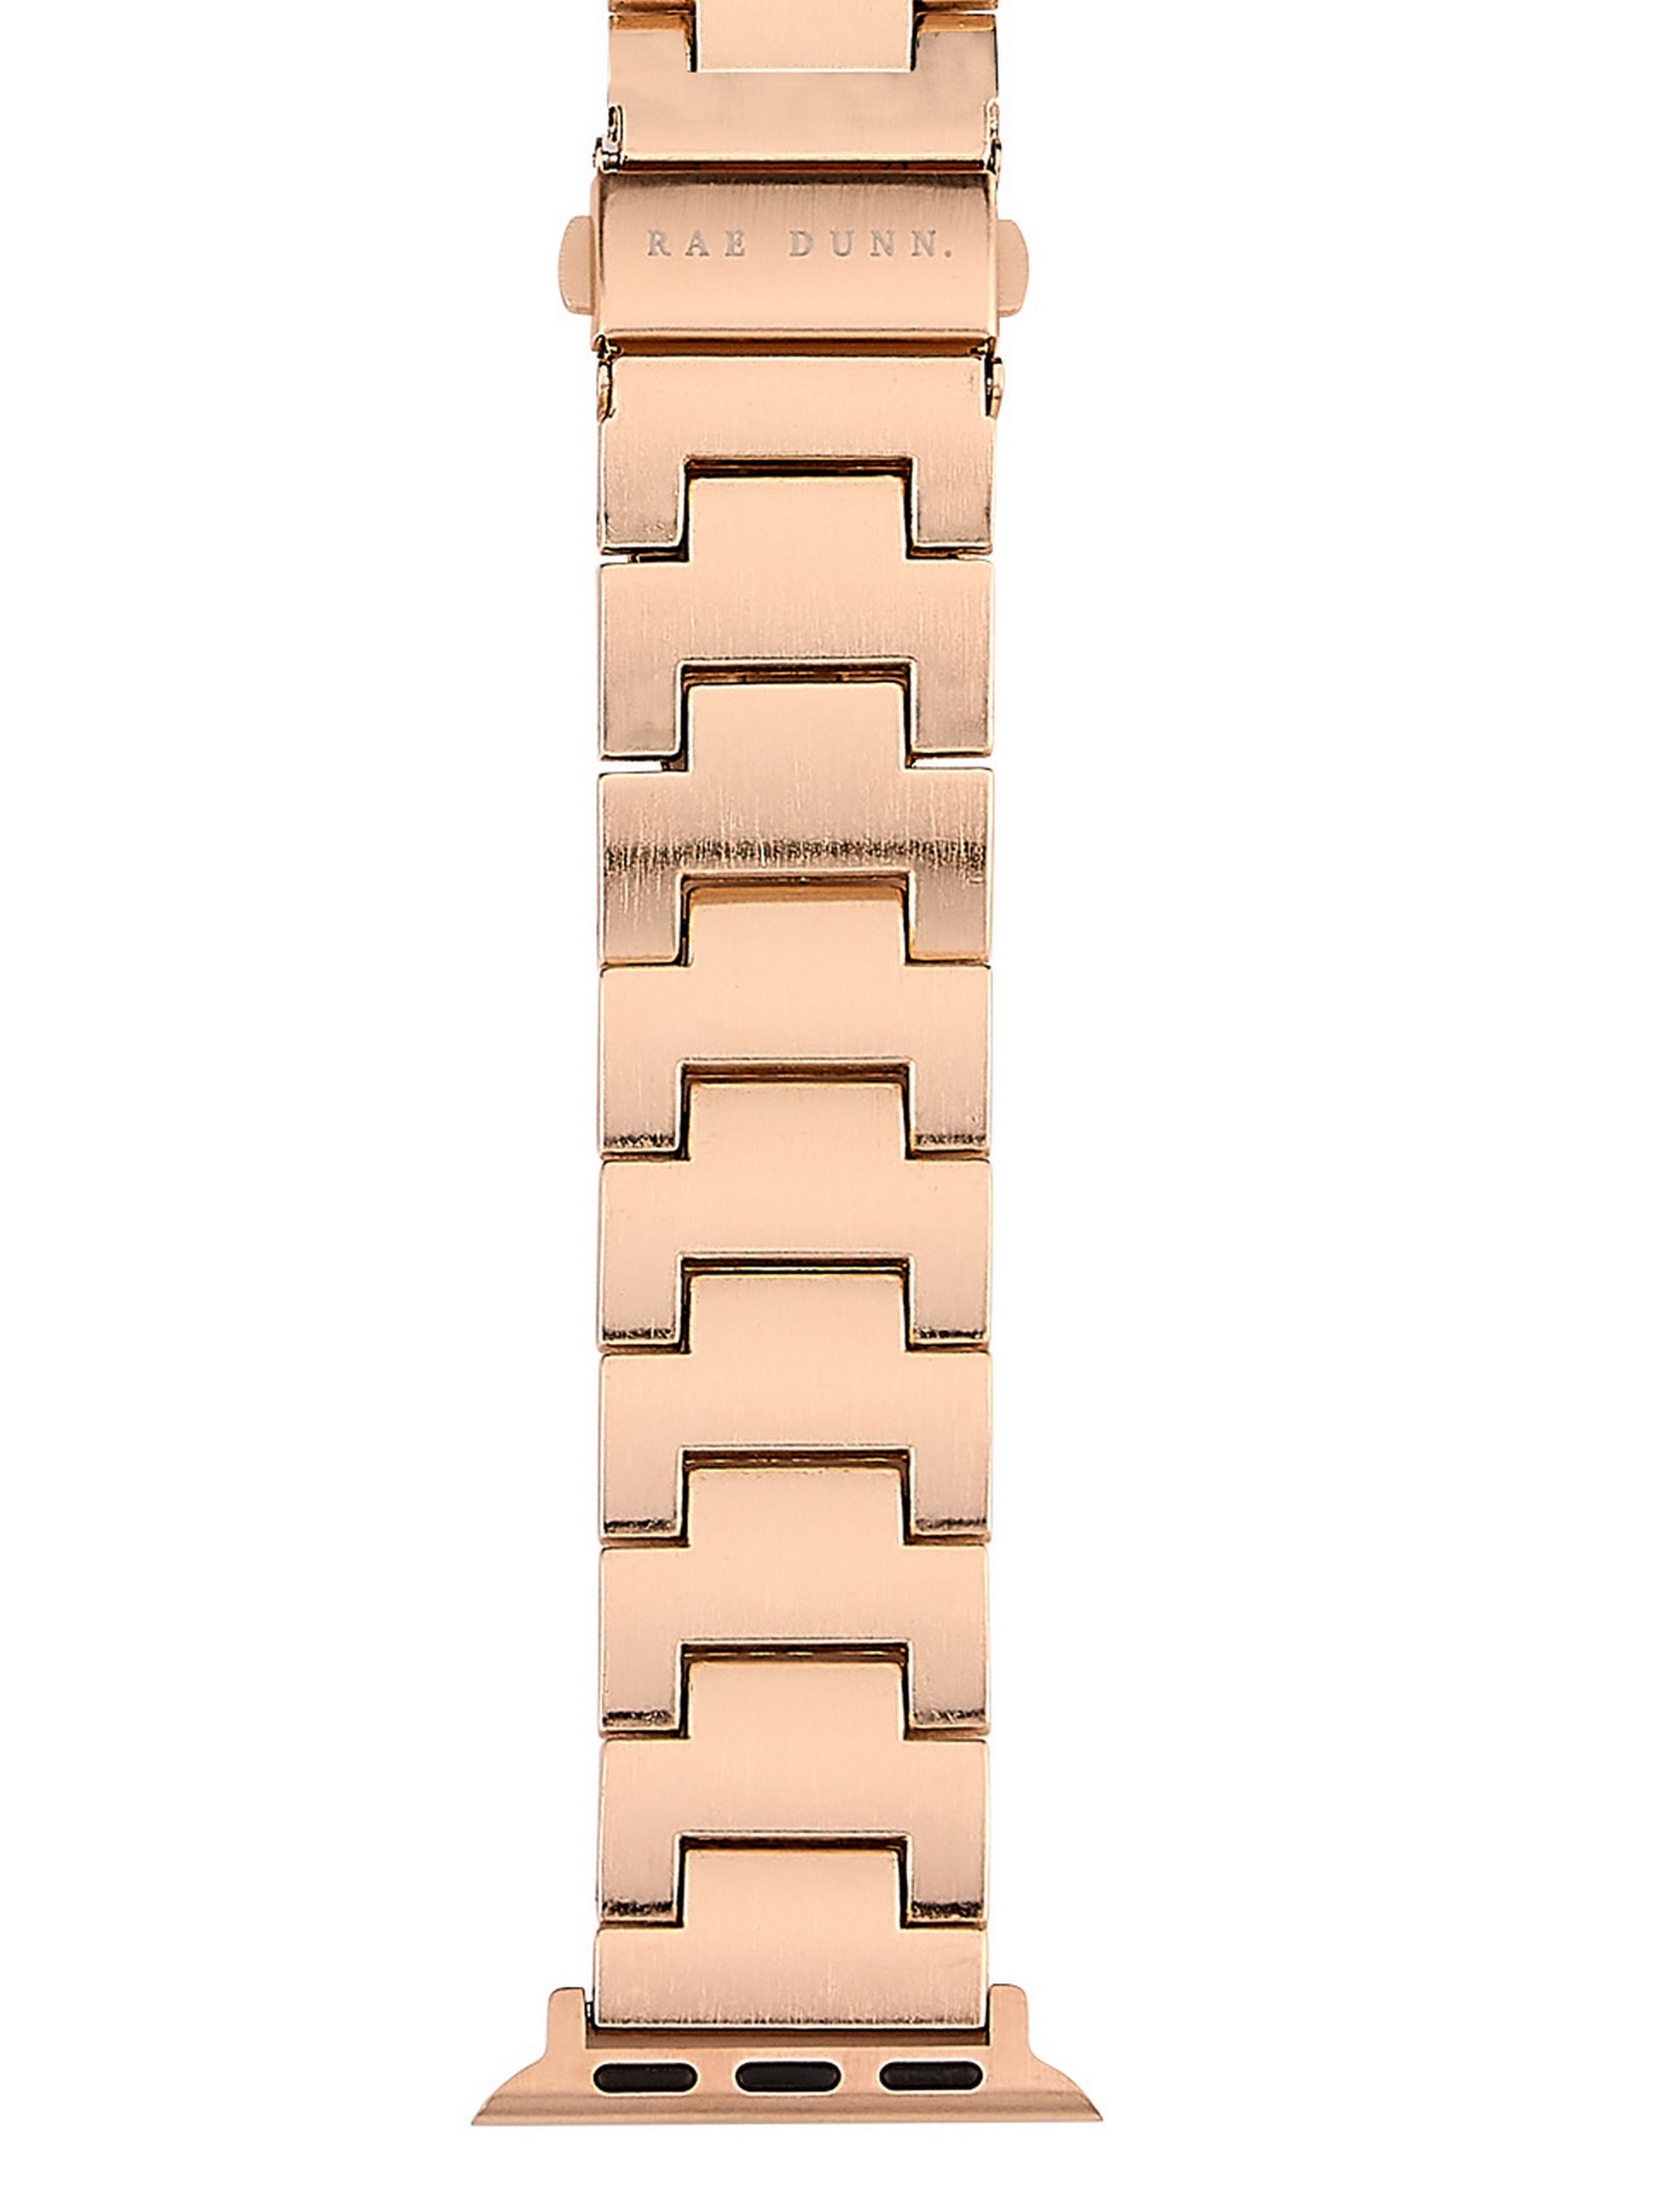 Rae Dunn Watch Bands Set of 3, compatible with Apple Watch 38mm 40mm Silicone, Link, Mesh in Rose Gold - Rae Dunn Wear - Watch